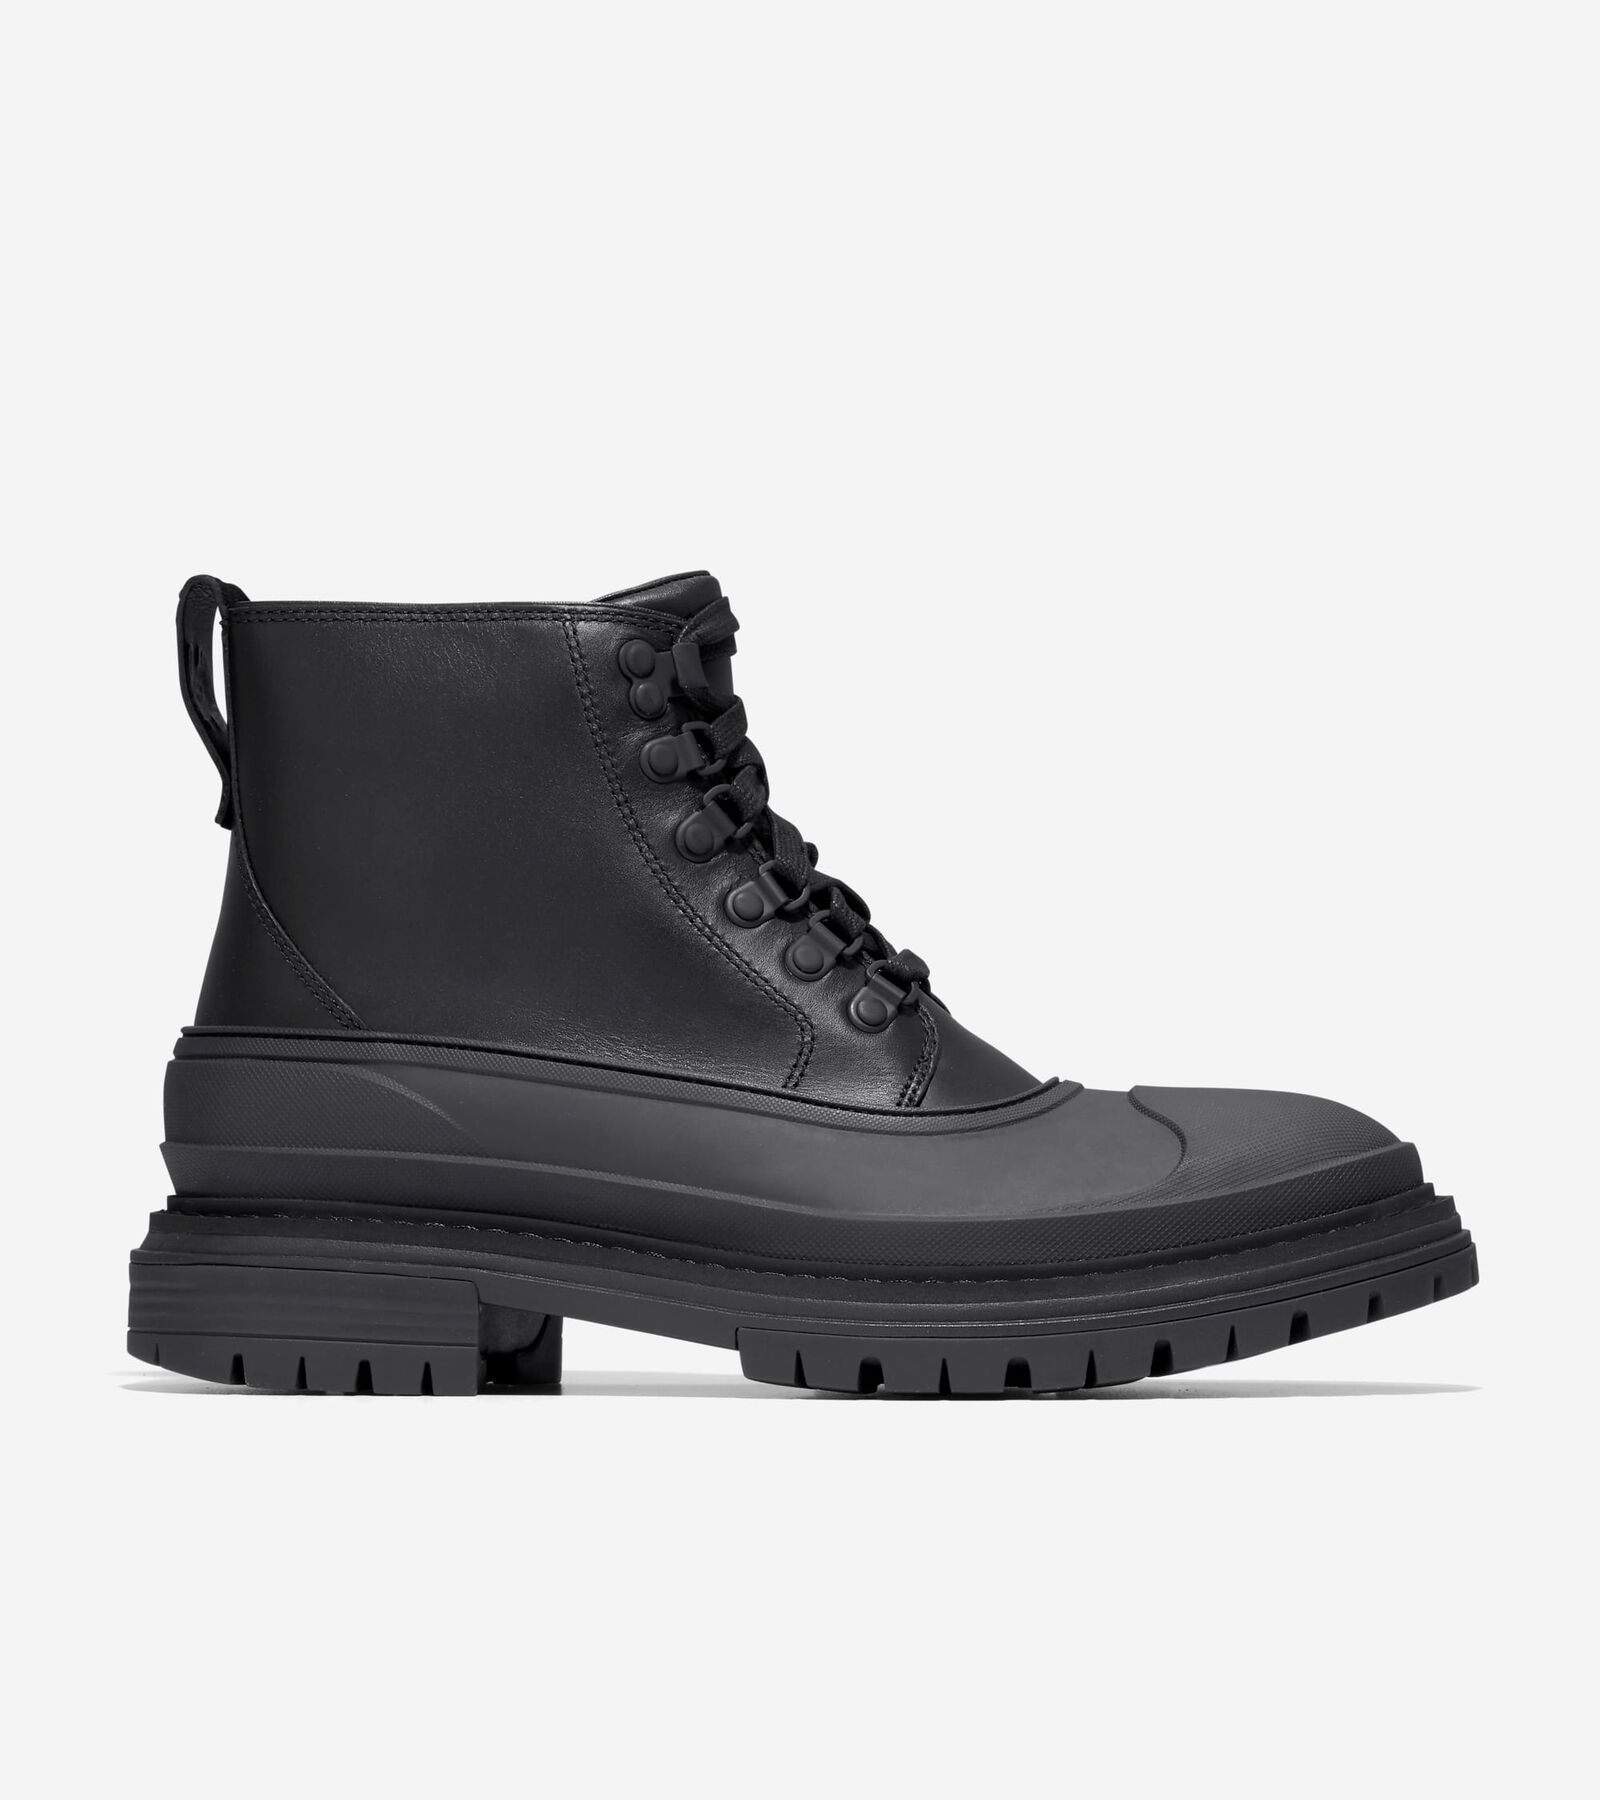 COLE HAAN COLE HAAN STRATTON SHROUD BOOT